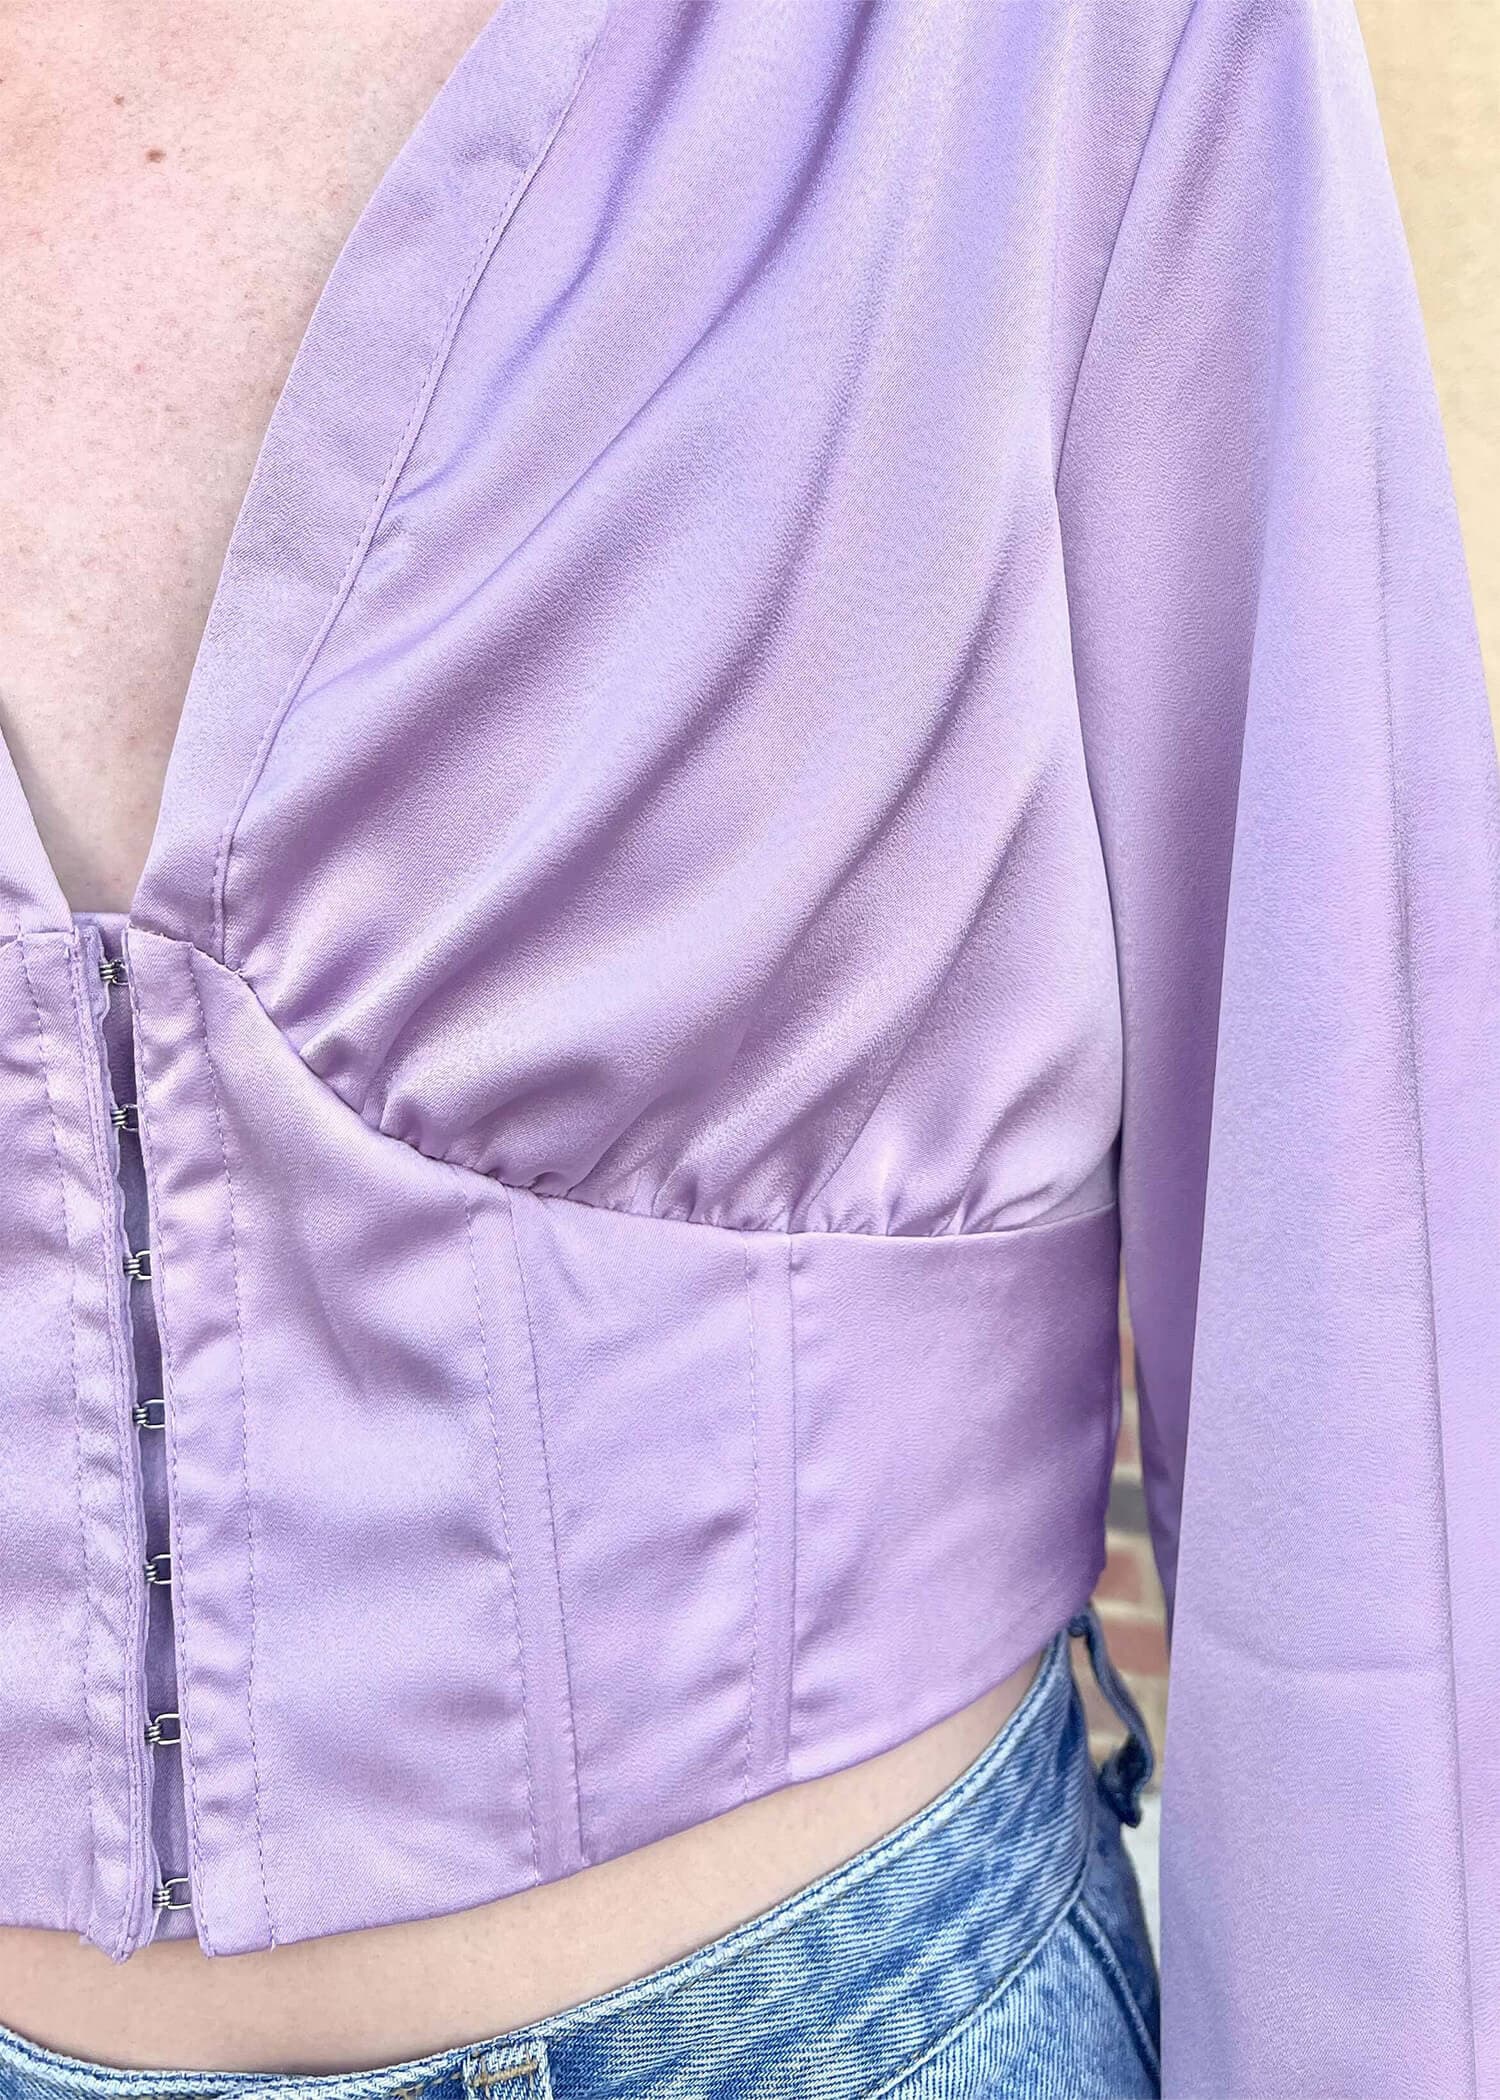 Still In Love With You Top - Lavender Tops MerciGrace Boutique.